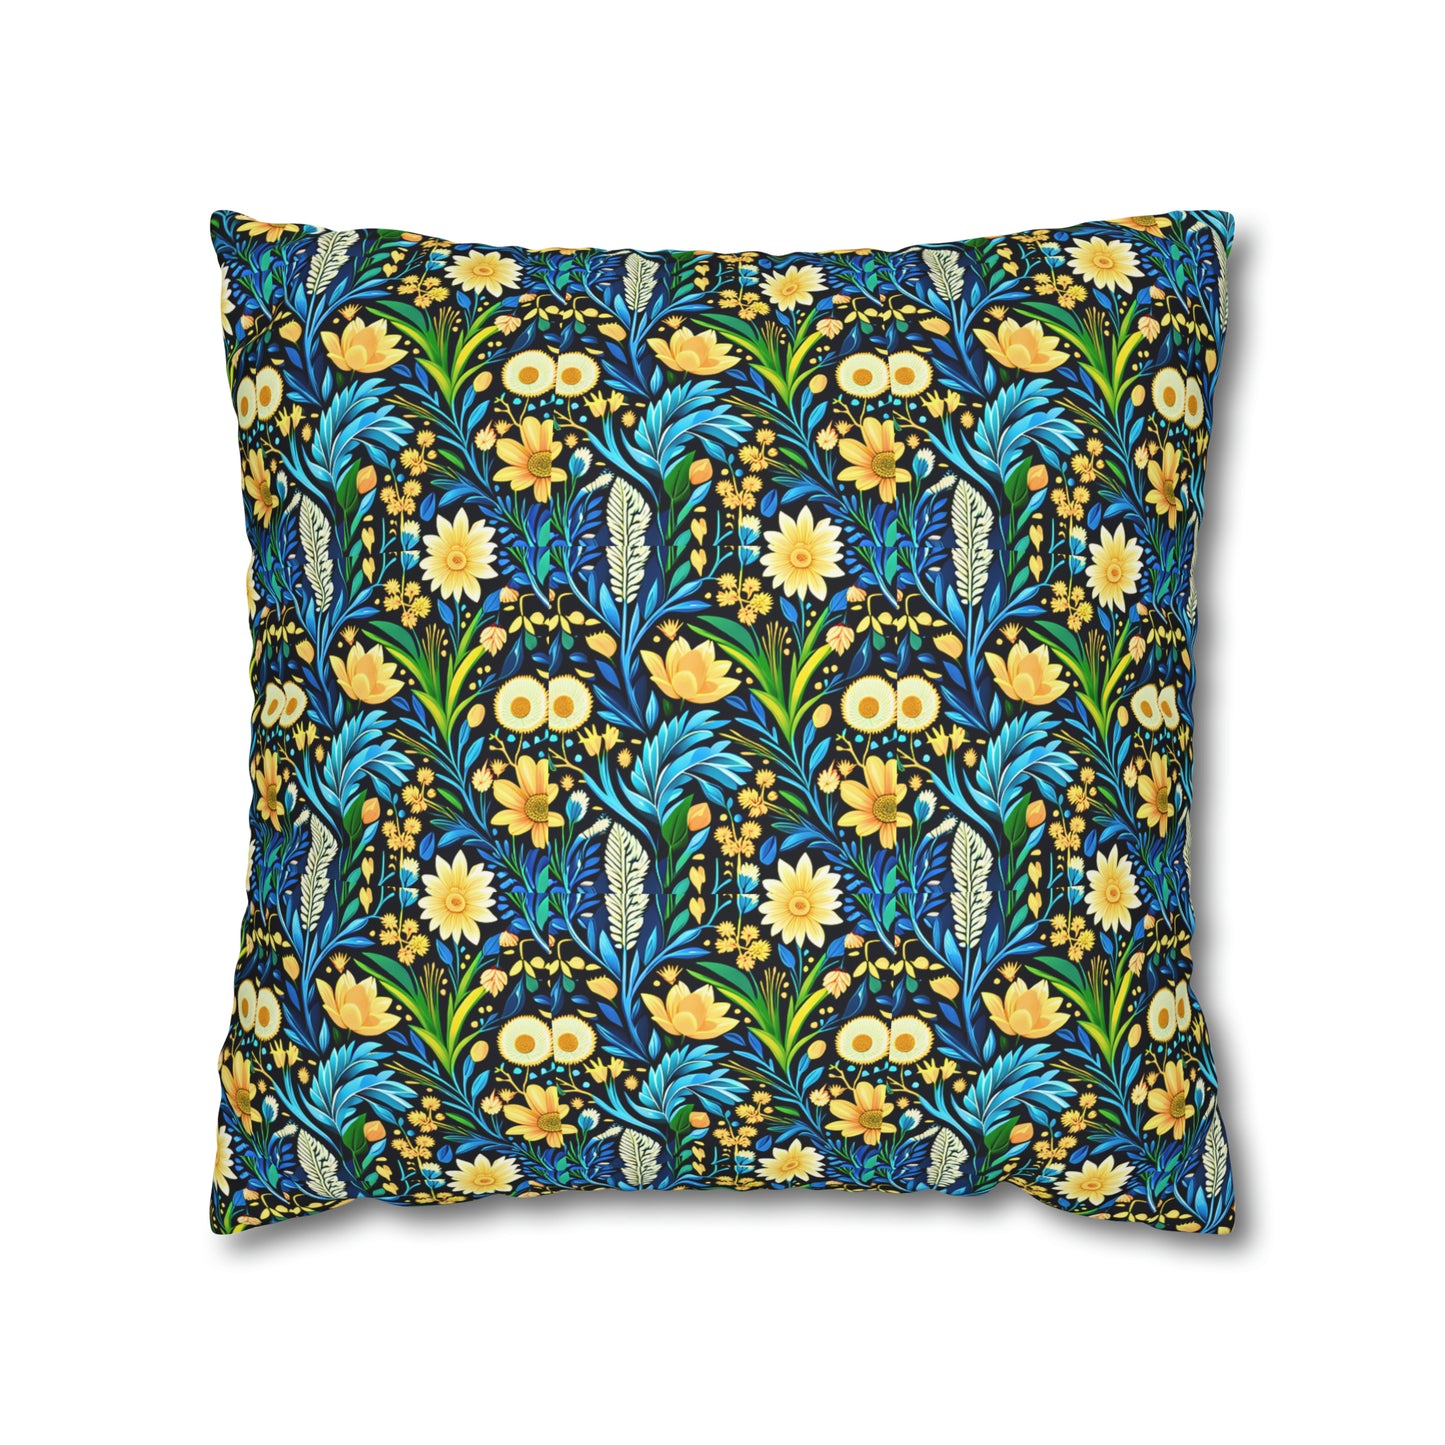 Hyde Park London Early English Daffodil Spring Flowers Decorative Accent Spun Polyester Pillow Cover